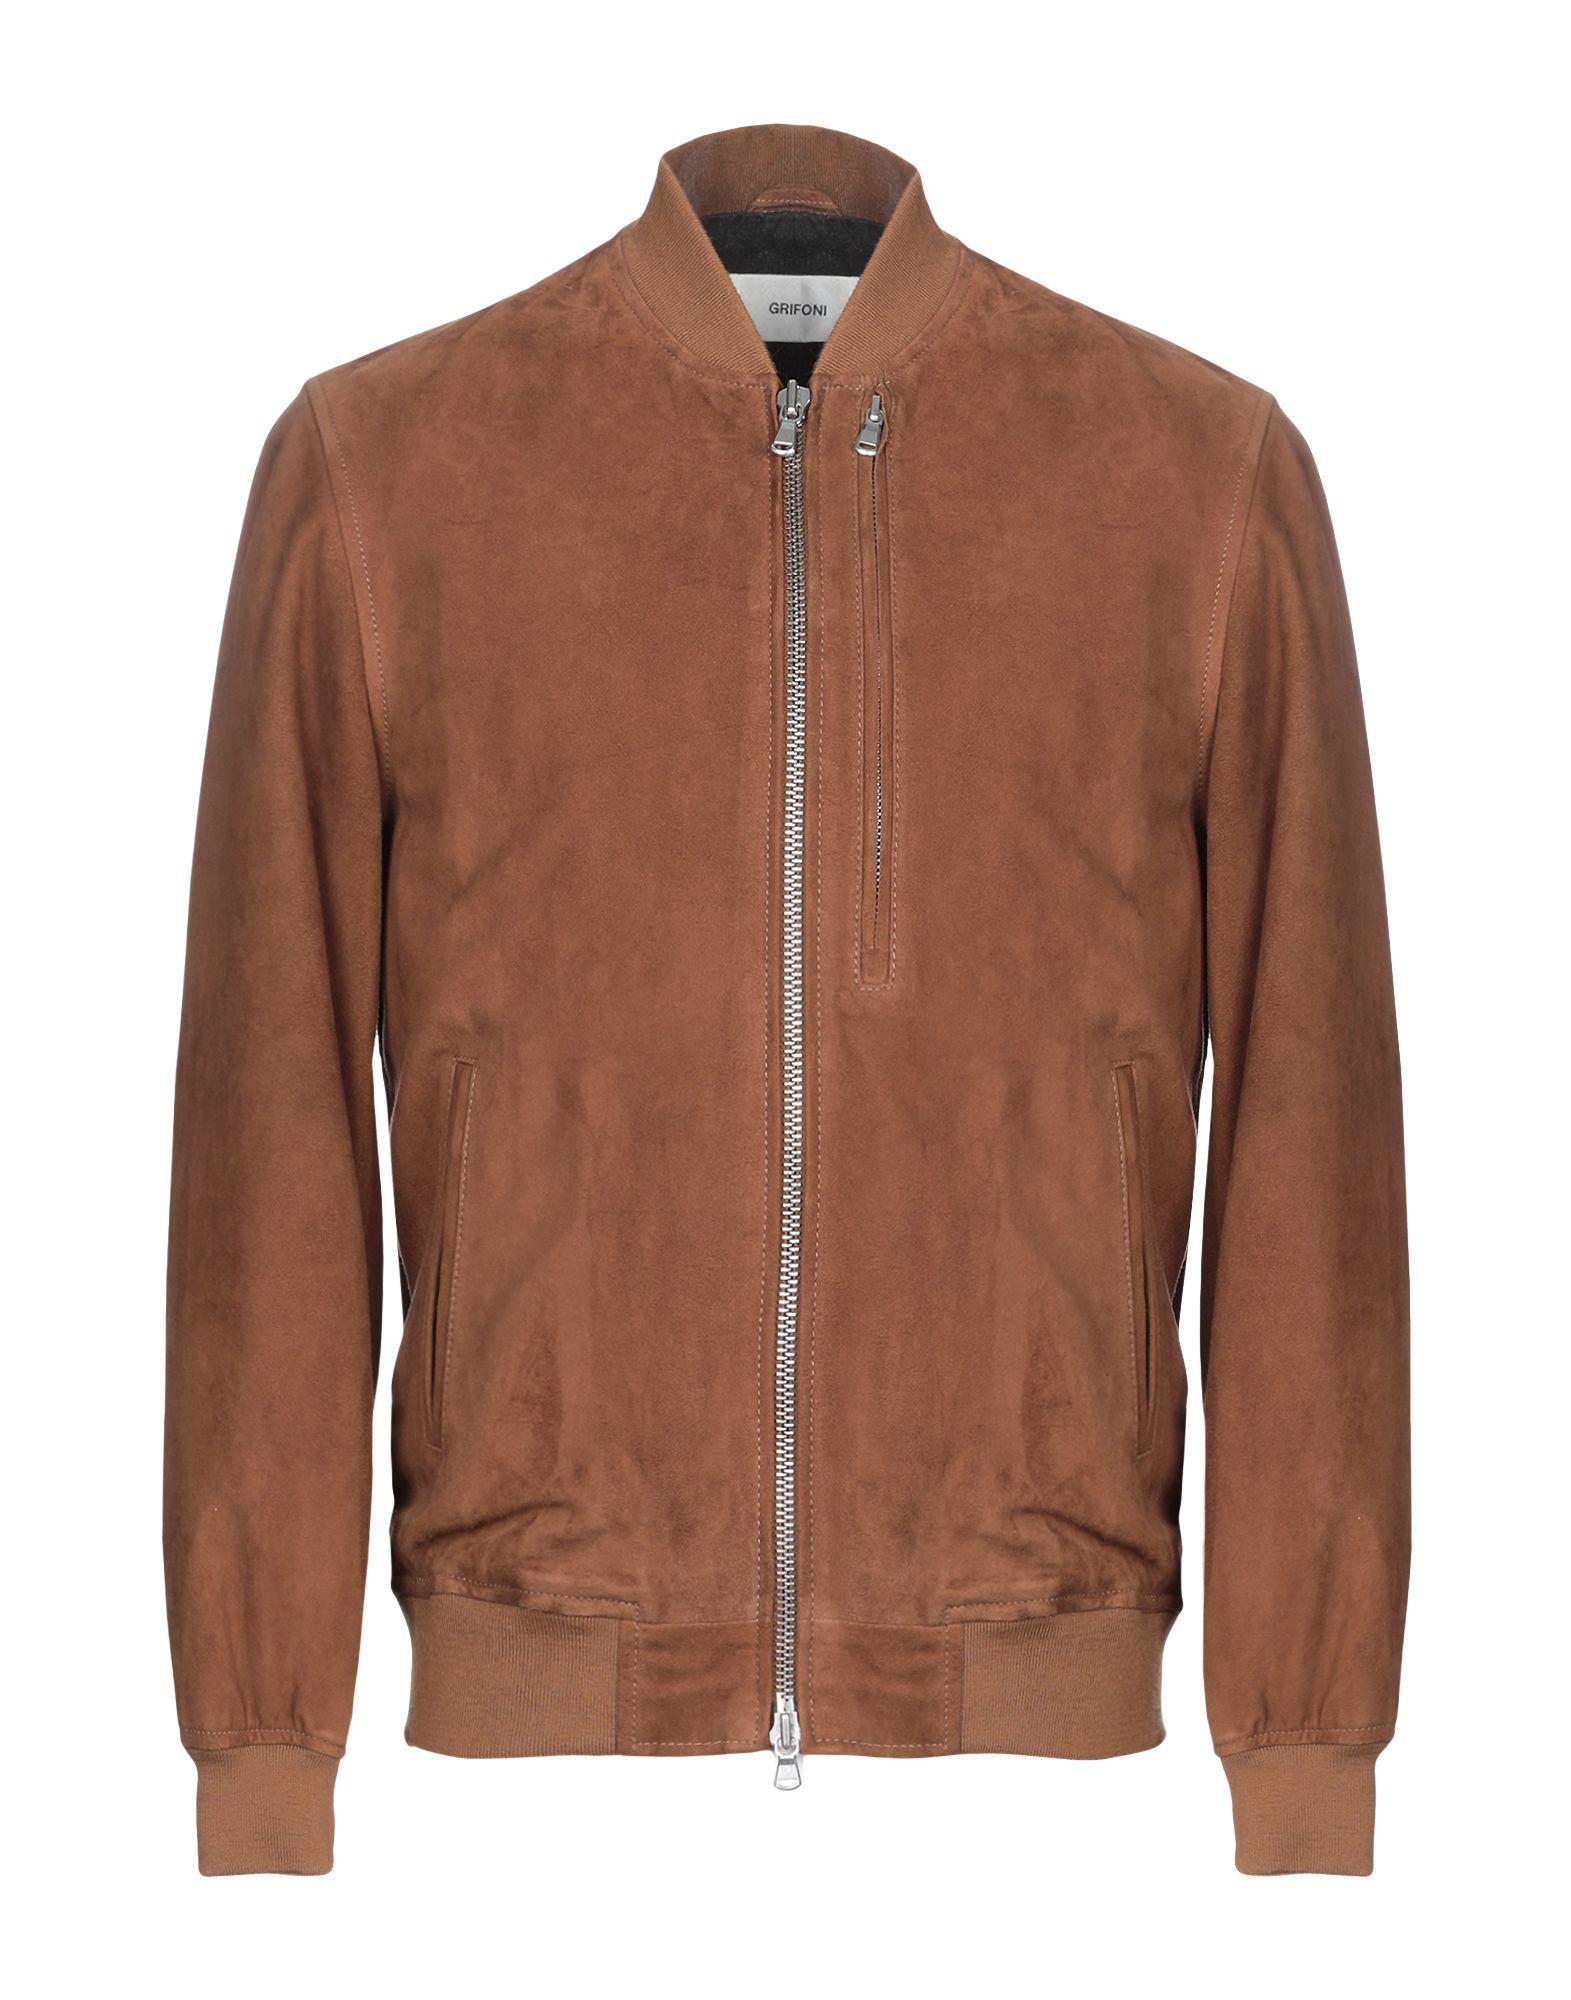 Lyst - Mauro Grifoni Jacket in Brown for Men